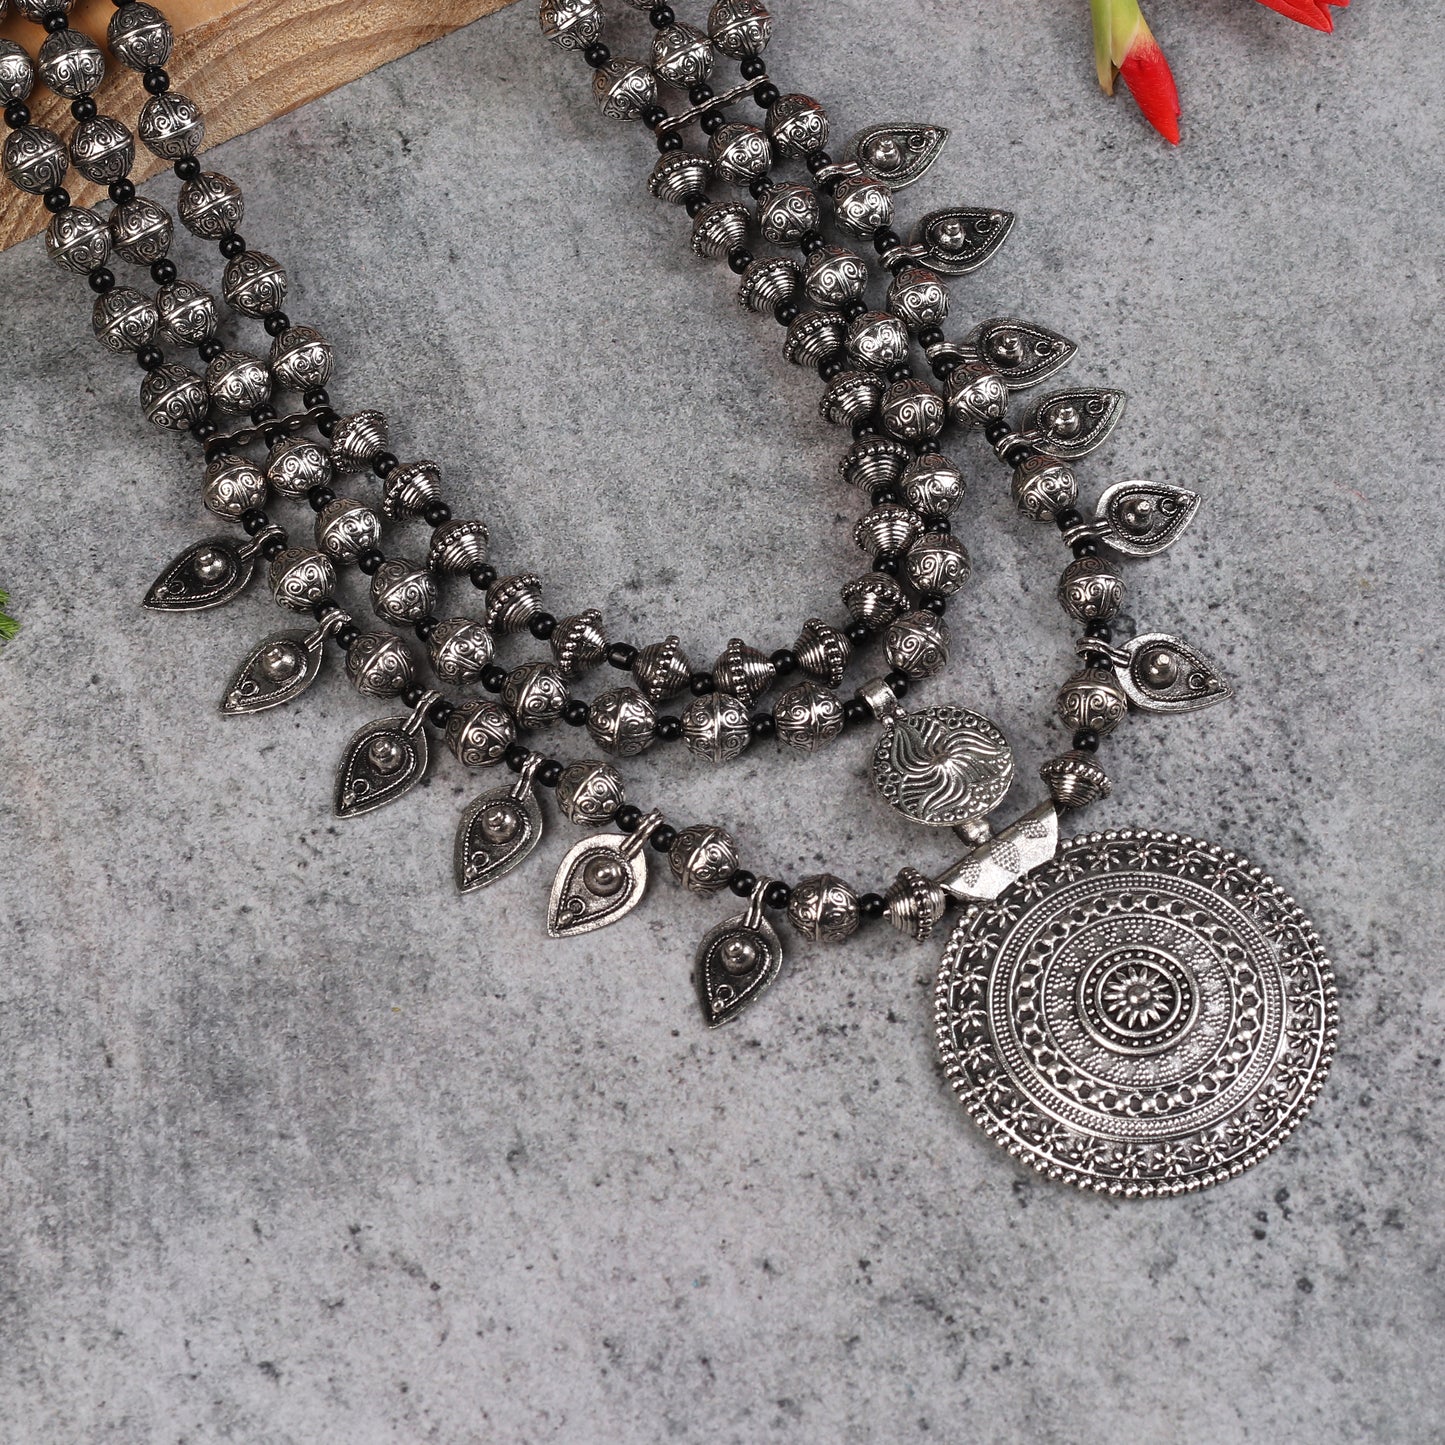 The Glorious Regalia Multilayered Necklace in Oxidized Silver